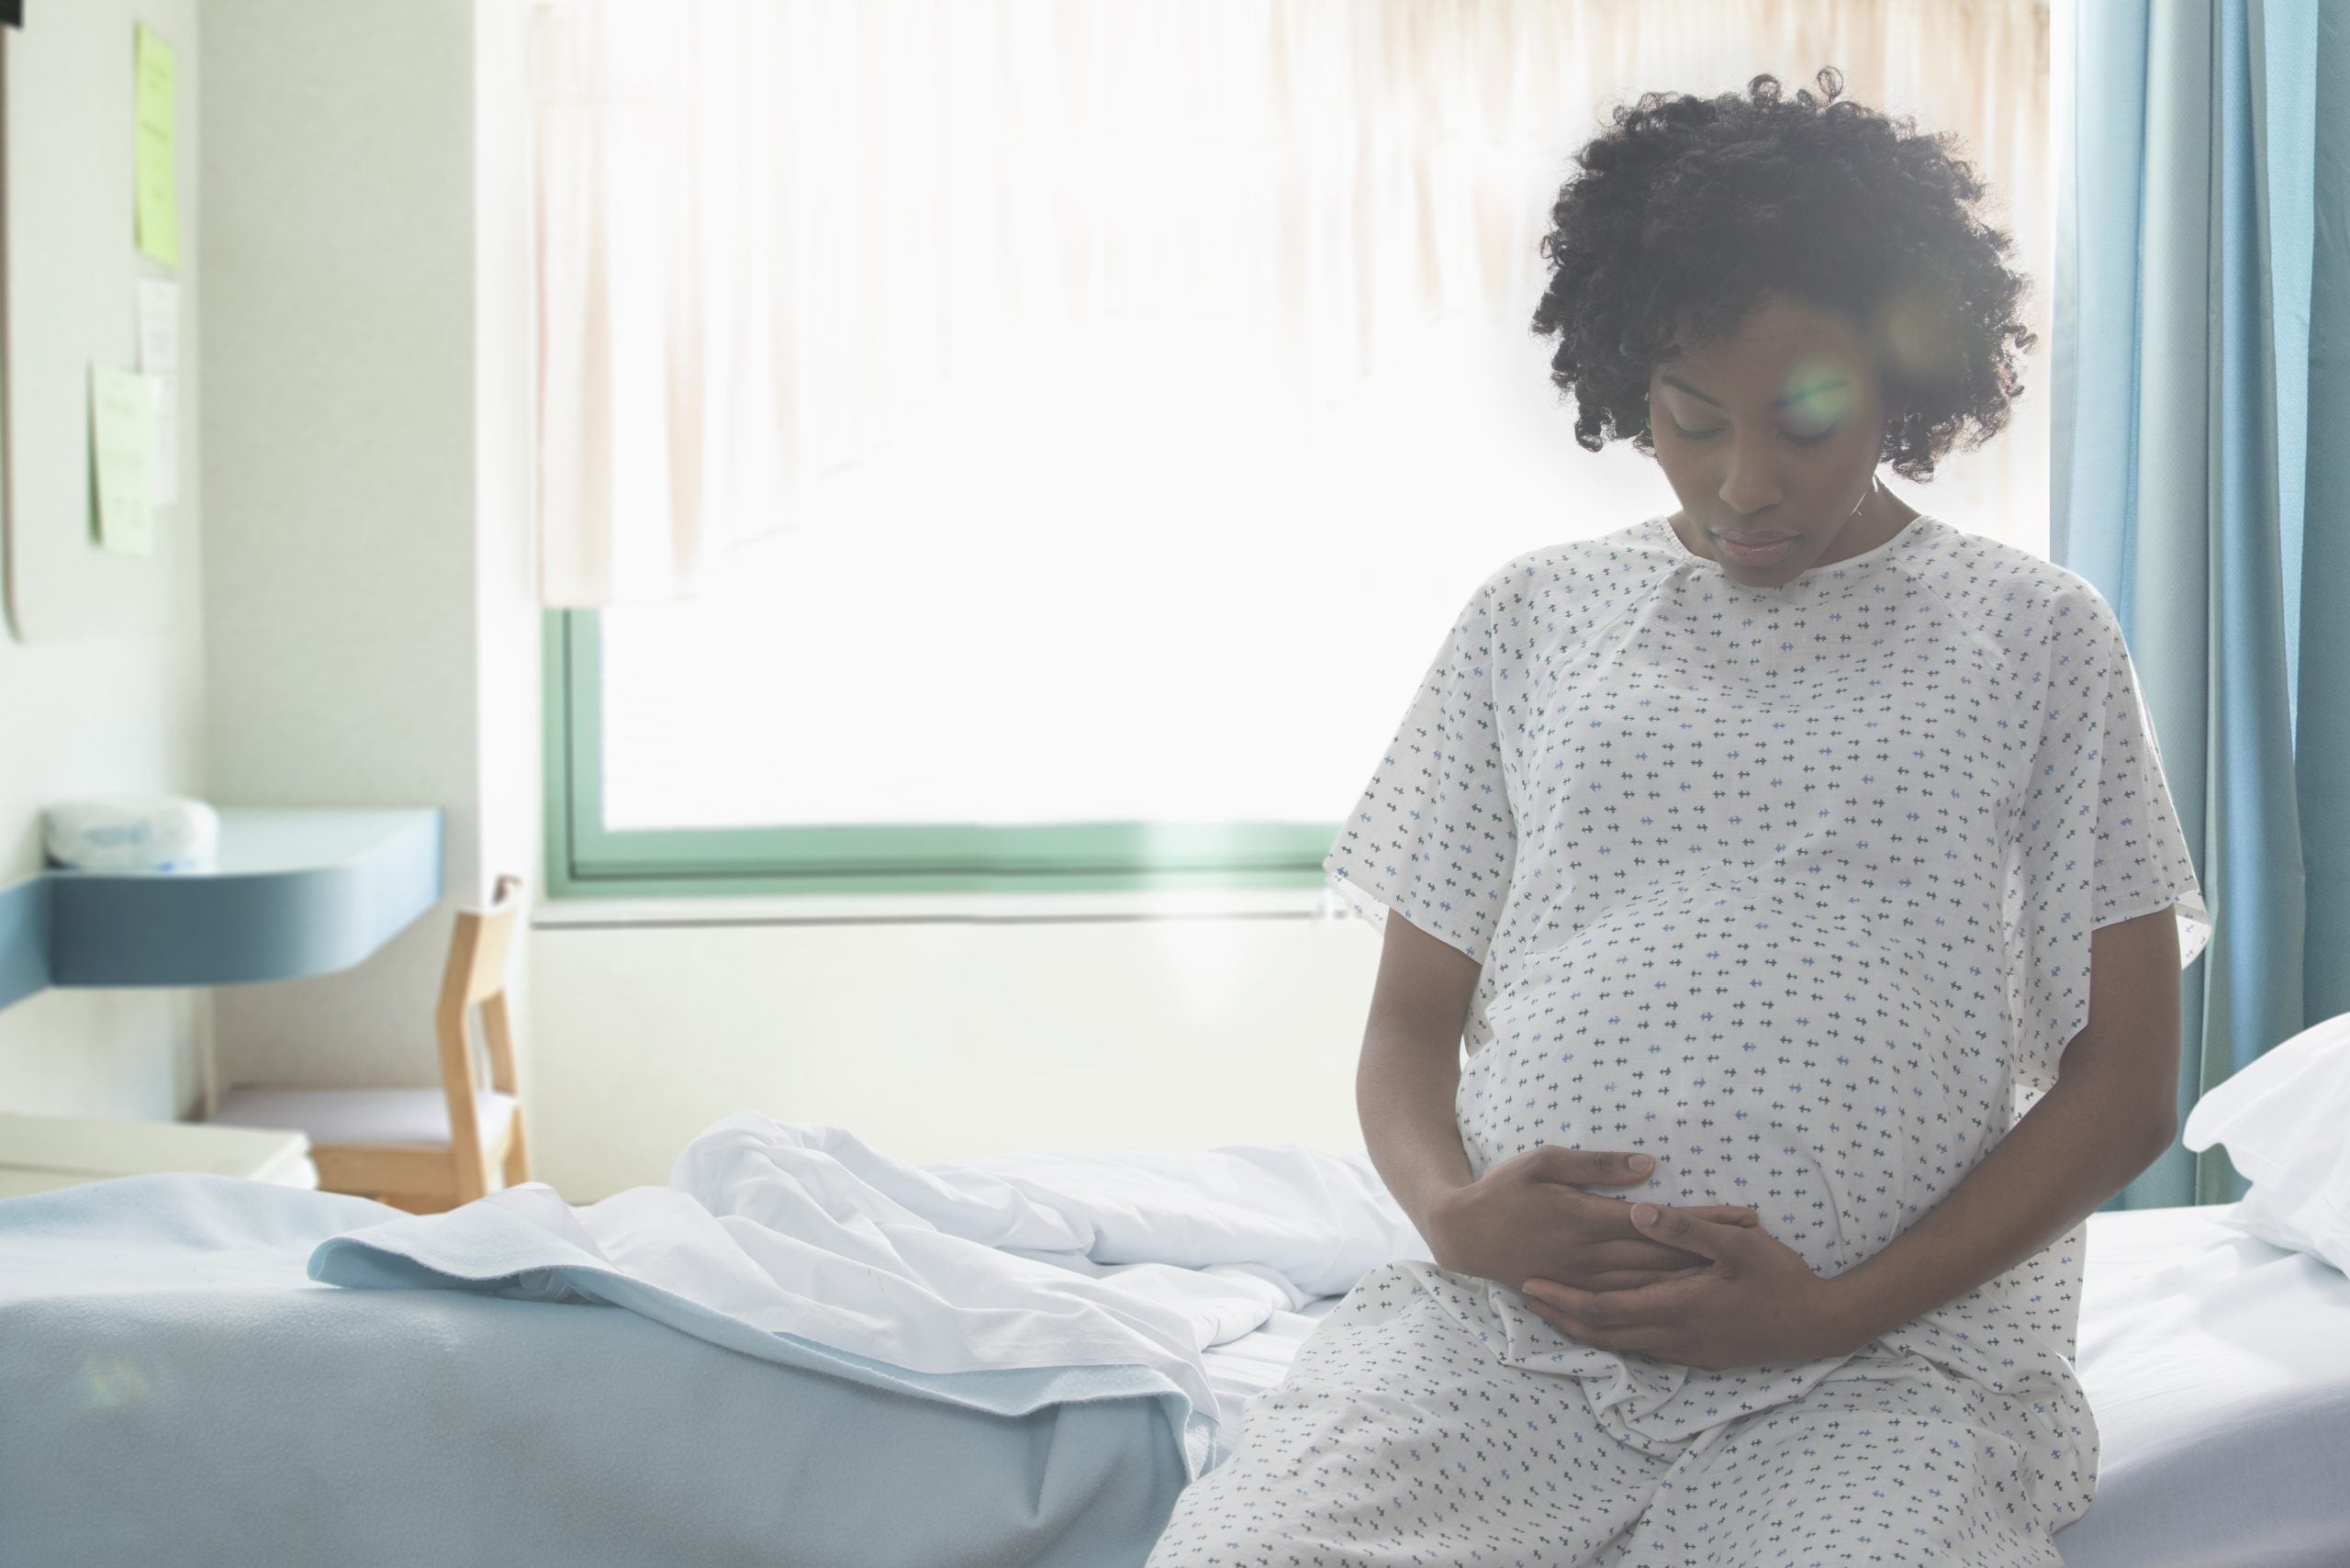 Want To Save Black Mothers? Start By Honoring Our Stories And Bodily Autonomy